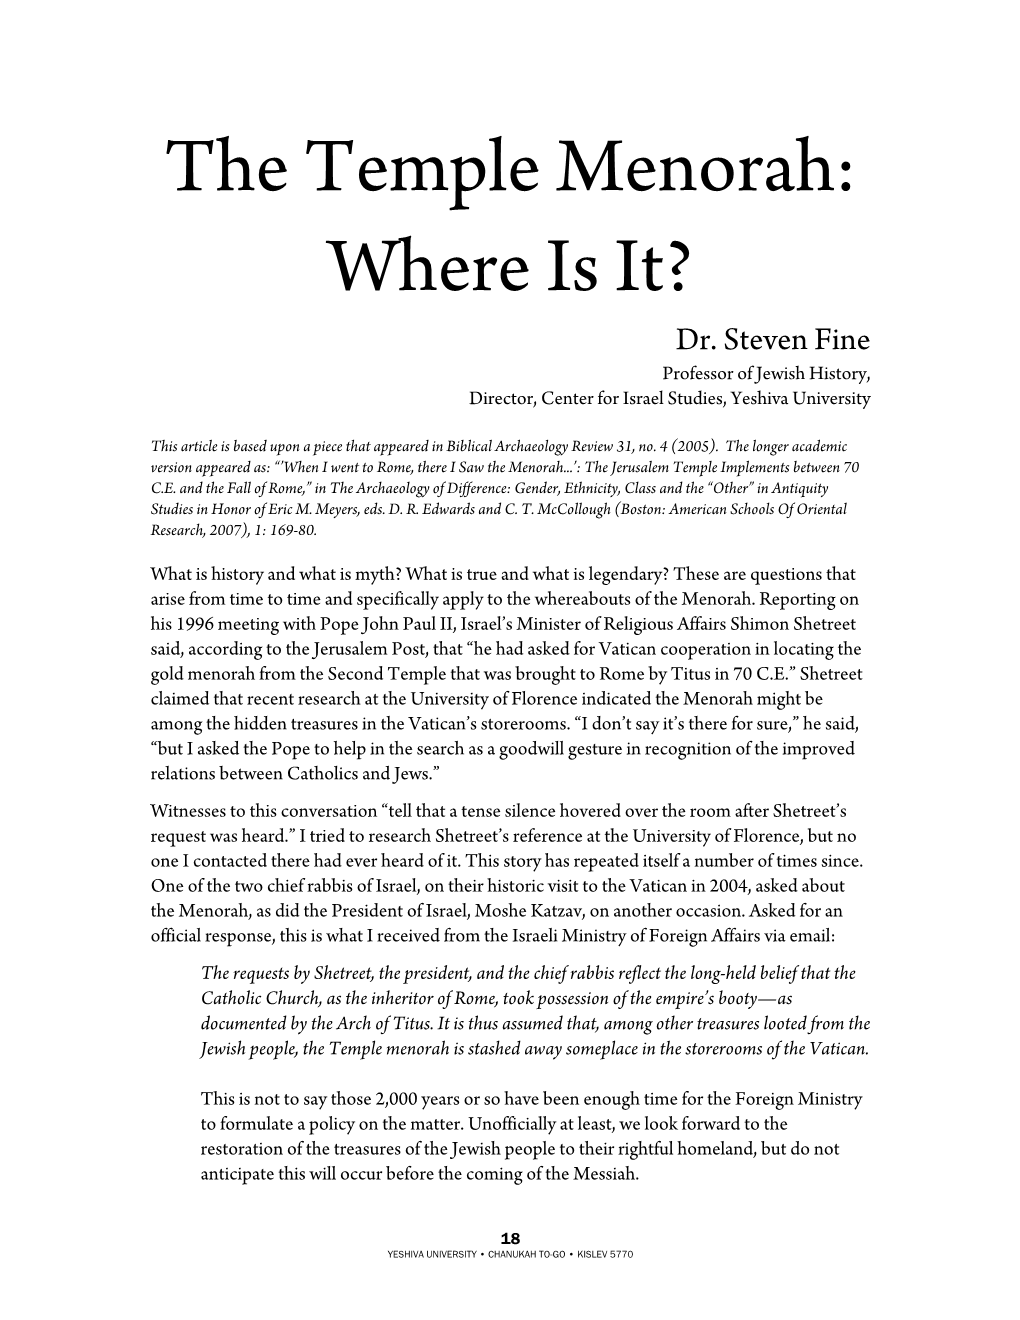 The Temple Menorah: Where Is It? Dr